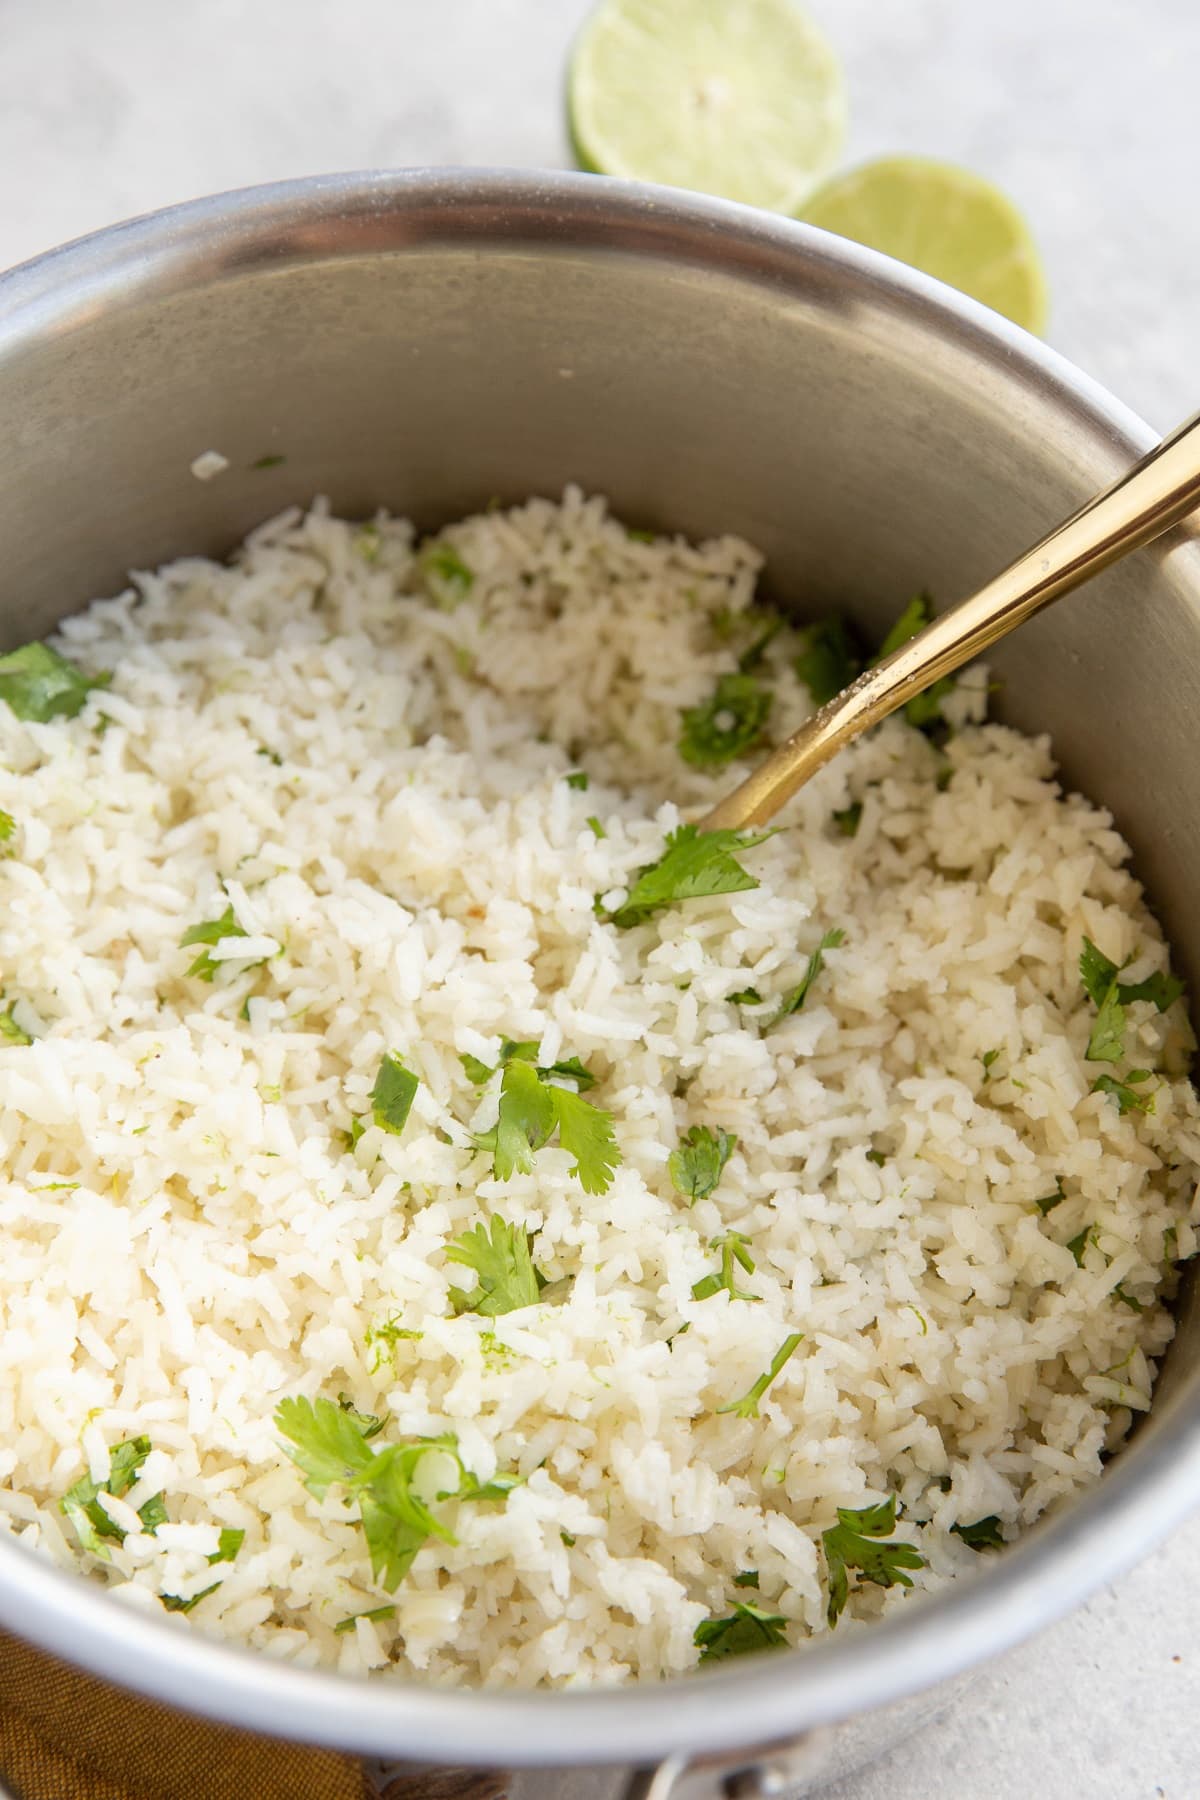 Cilantro Lime rice in a stainless steel pot with a golden fork, ready to serve.